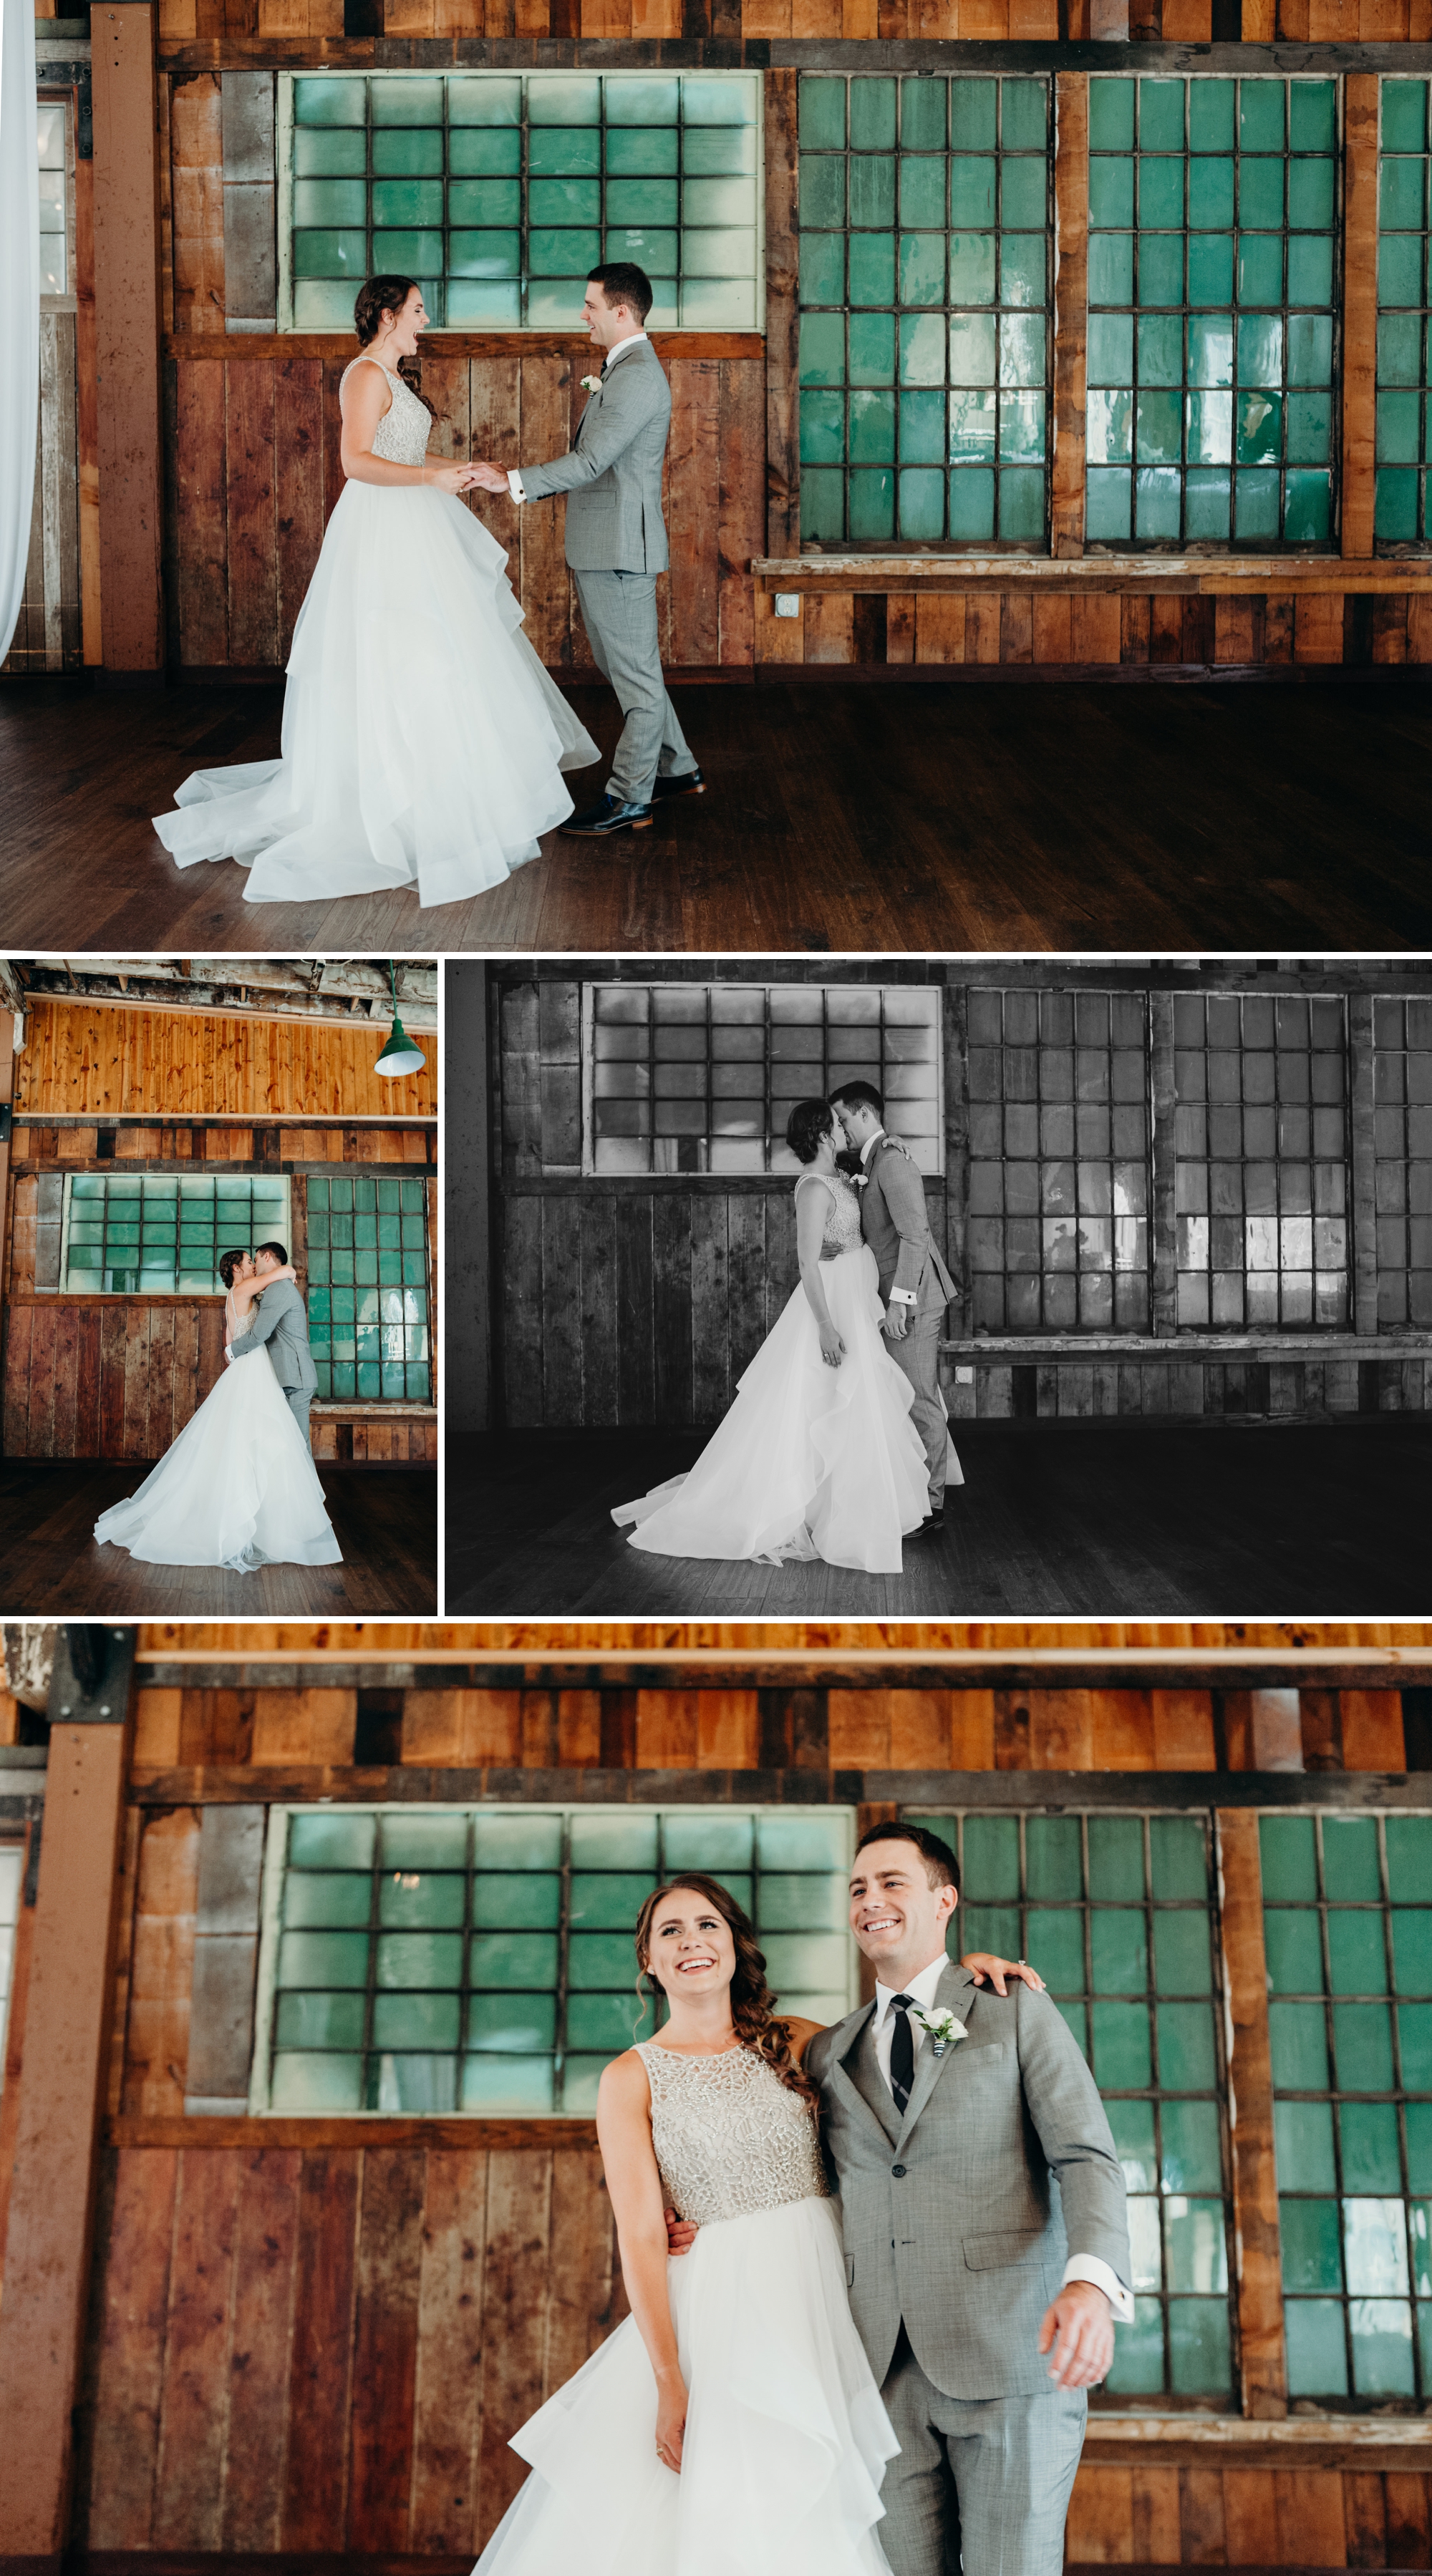 The bride and groom have their first look inside Sodo Park. By Sodo Park wedding photographer Briana Morrison.